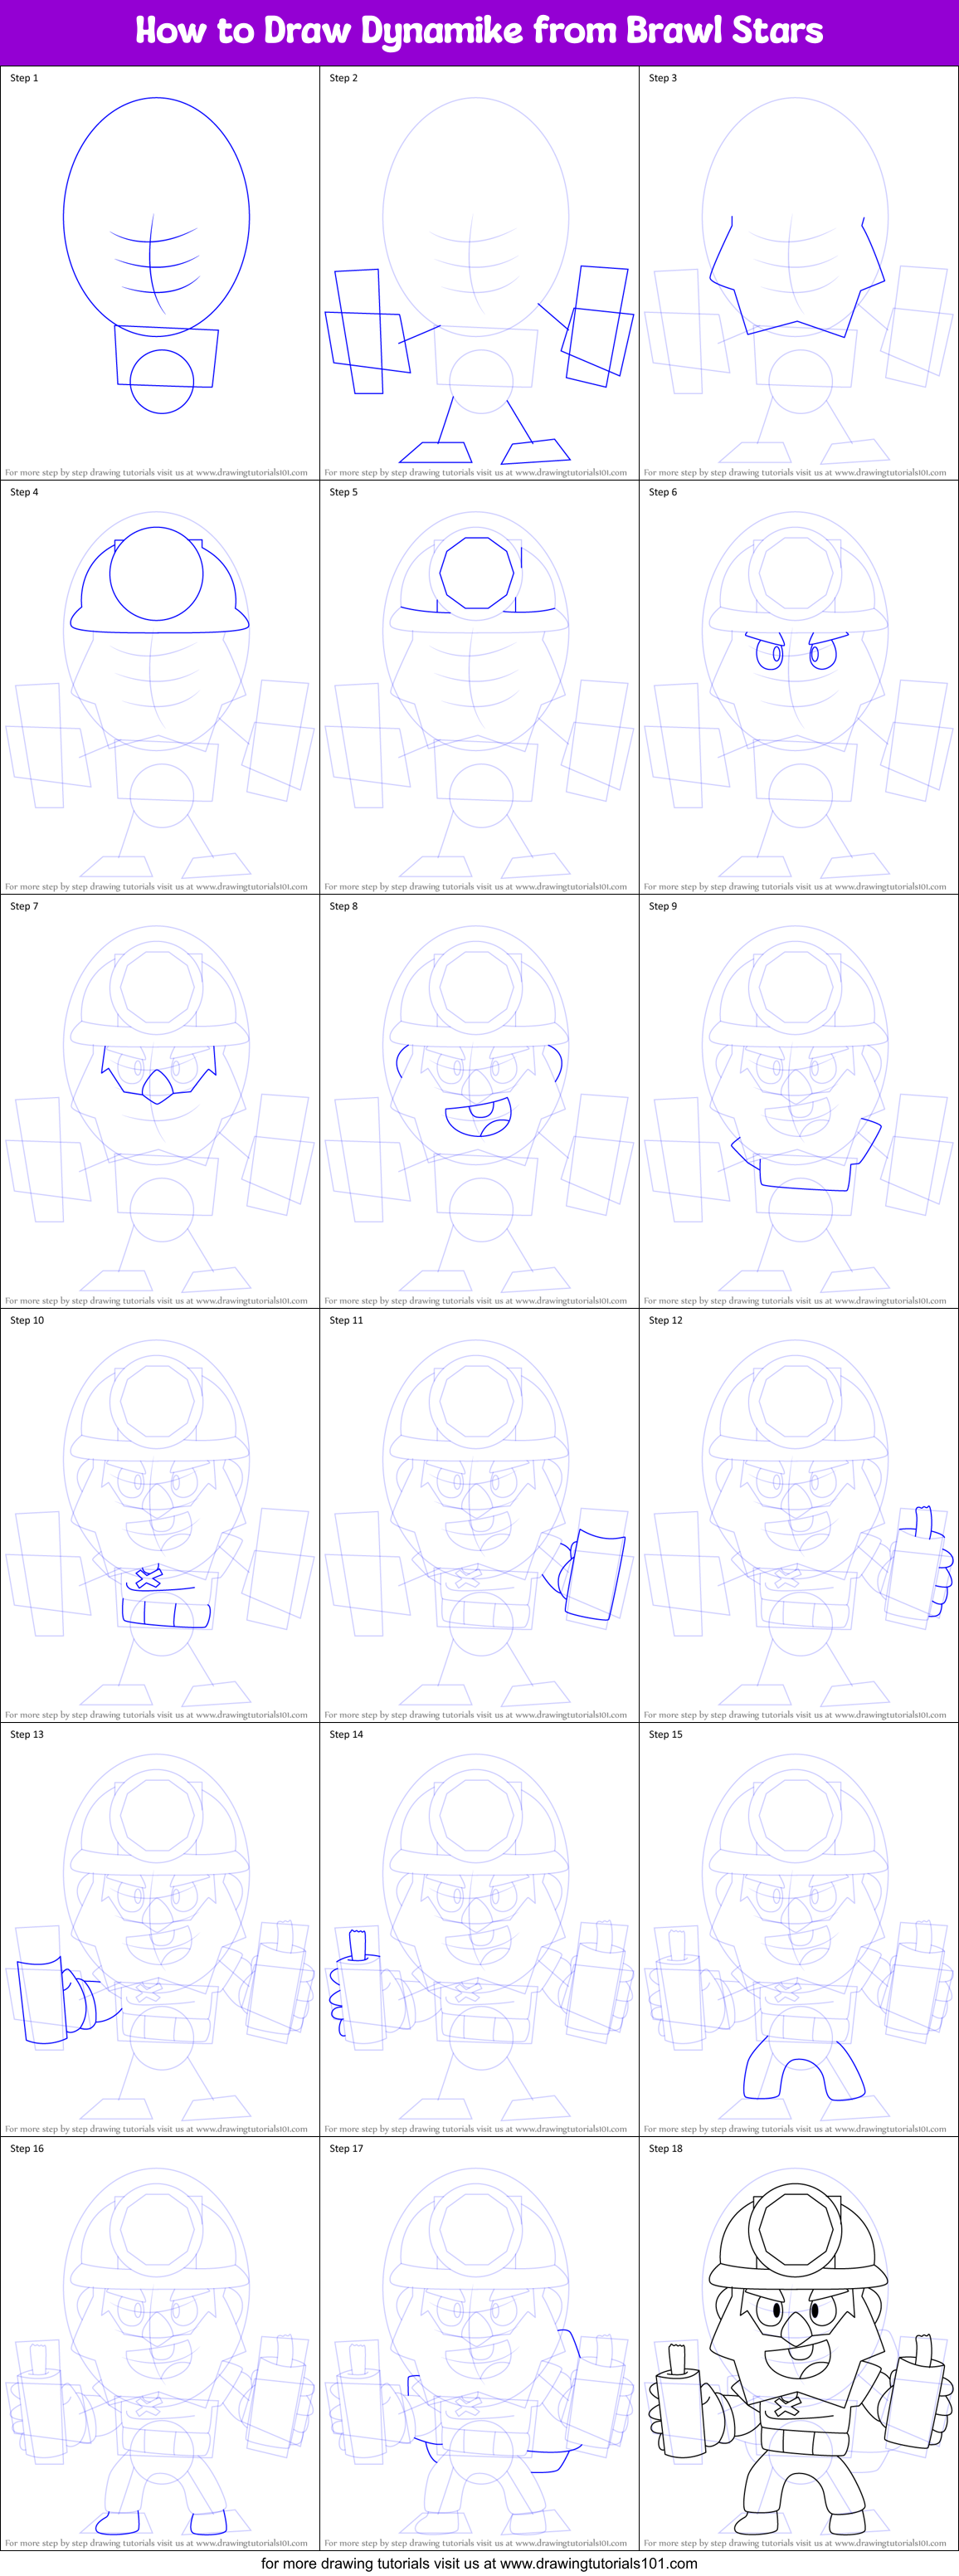 How To Draw Dynamike From Brawl Stars Printable Step By Step Drawing Sheet Drawingtutorials101 Com - dinamike brawl stars png